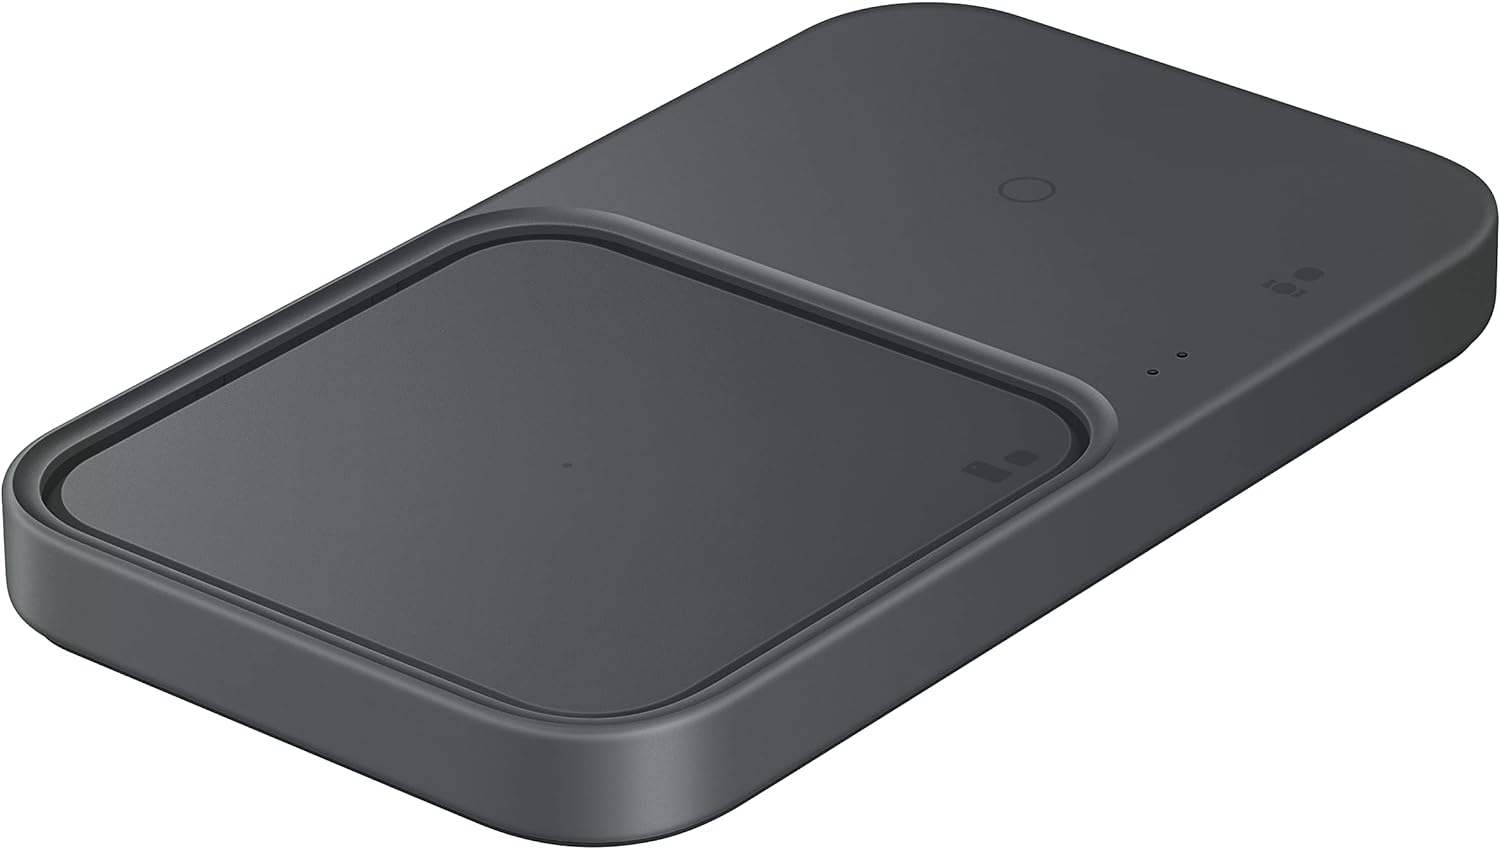 Samsung 15W Duo Fast Wireless Charger Pad - Black (Certified Refurbished)